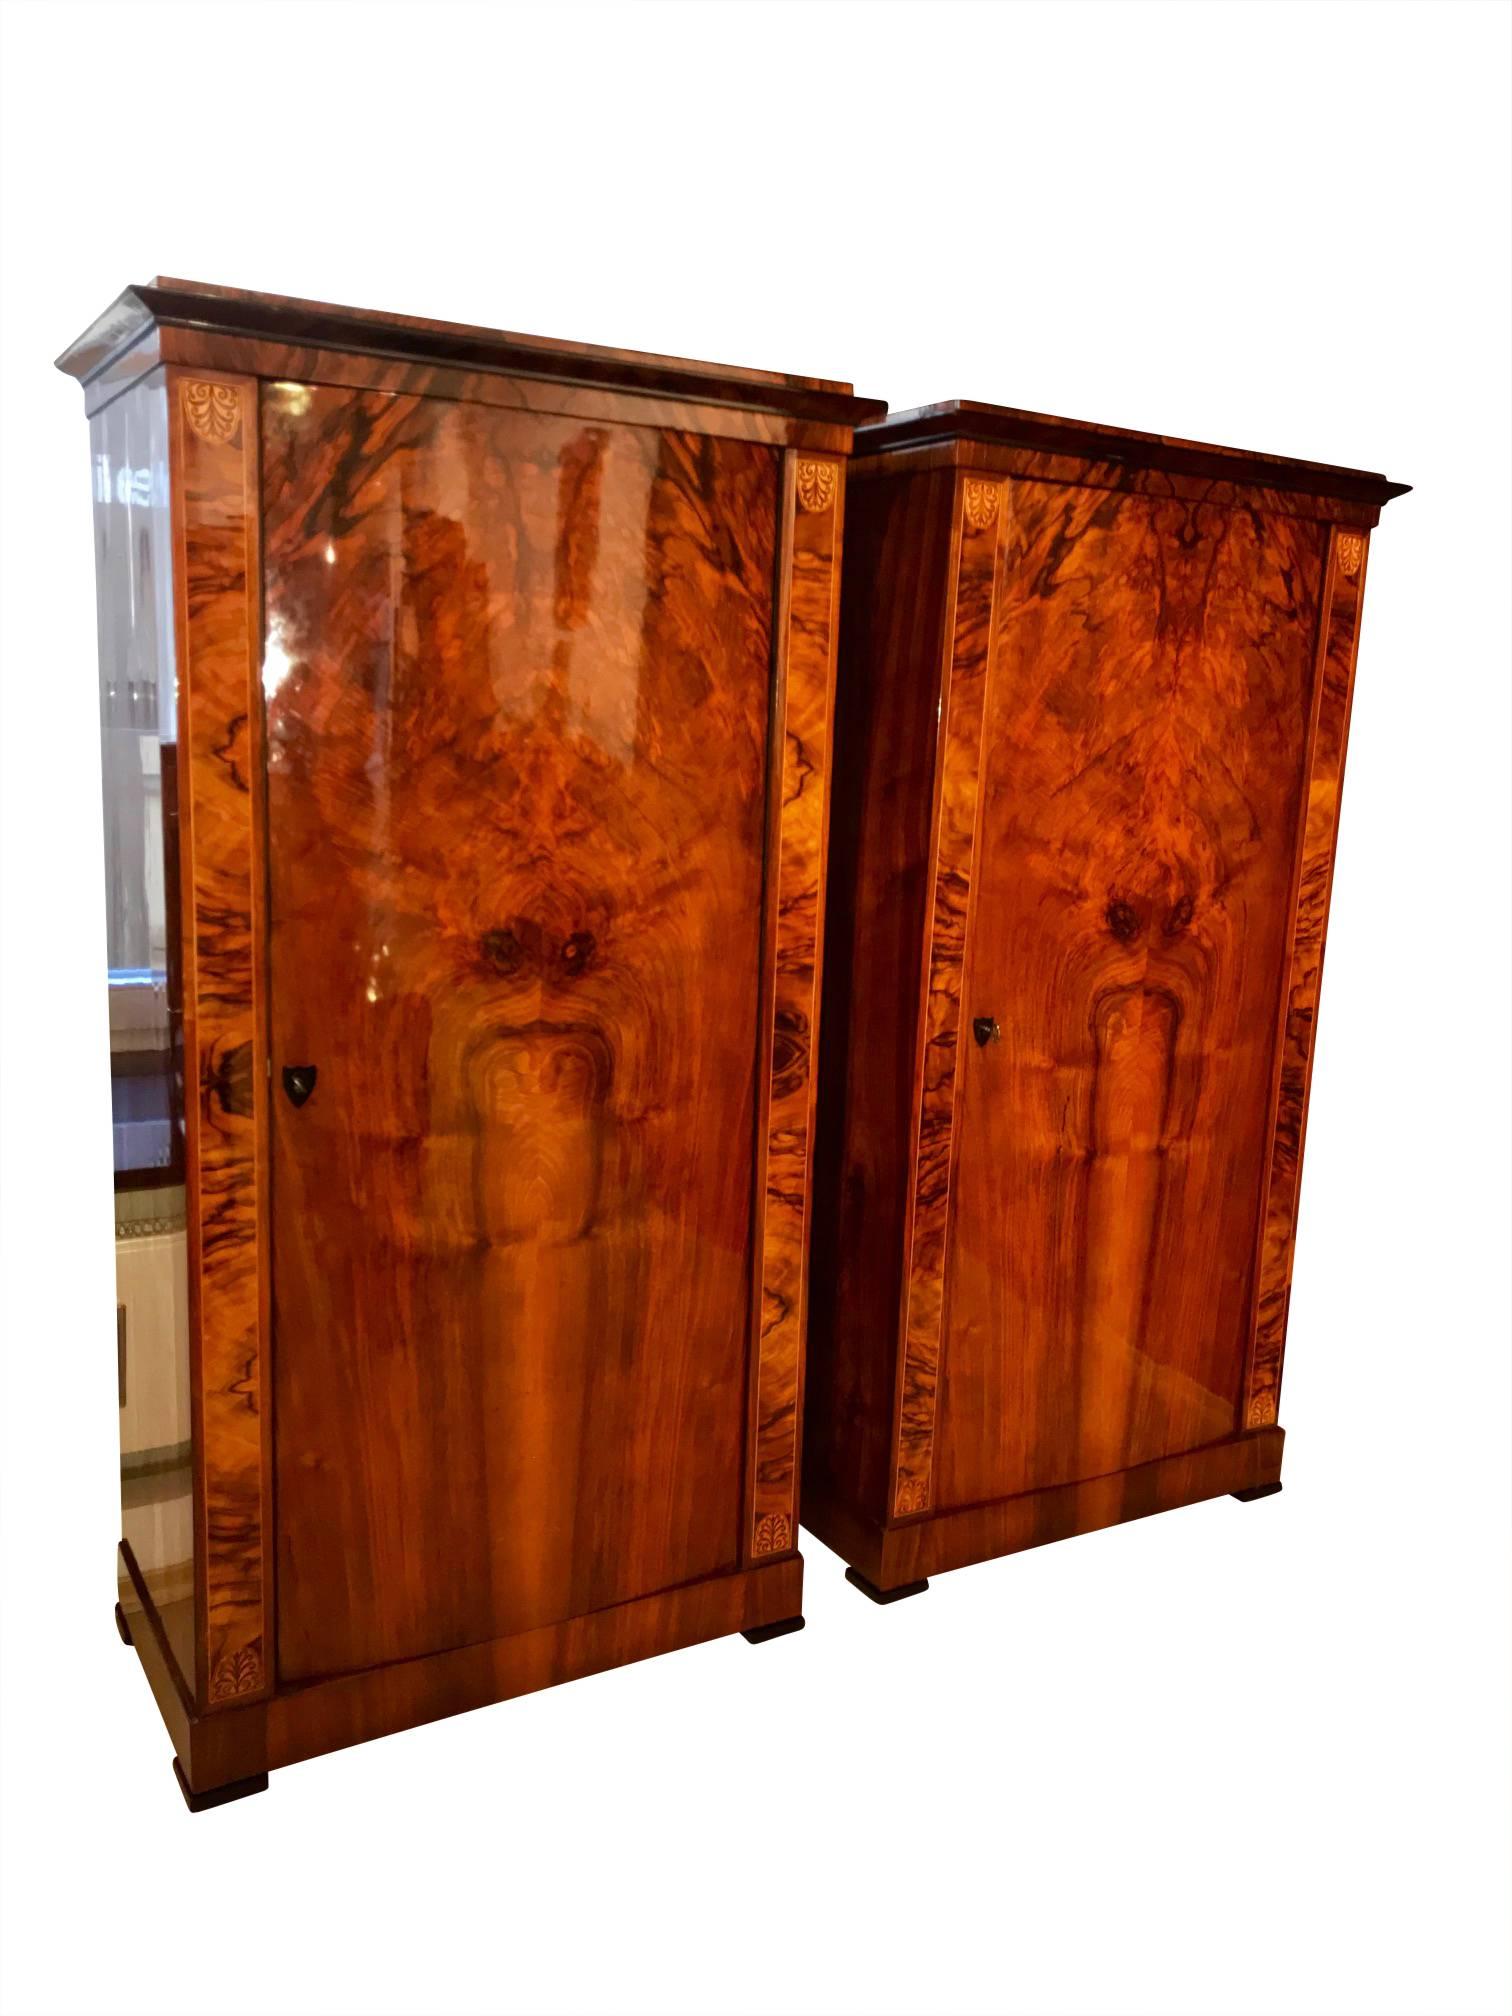 Beautiful Pair of one doored neoclassical Biedermeier Armoires / Wardrobes from Austria around 1830.

Wonderful lightly convex doors and finely book-matched walnut veneer on the front and sides. Finished with a very elaborate shellac hand polish